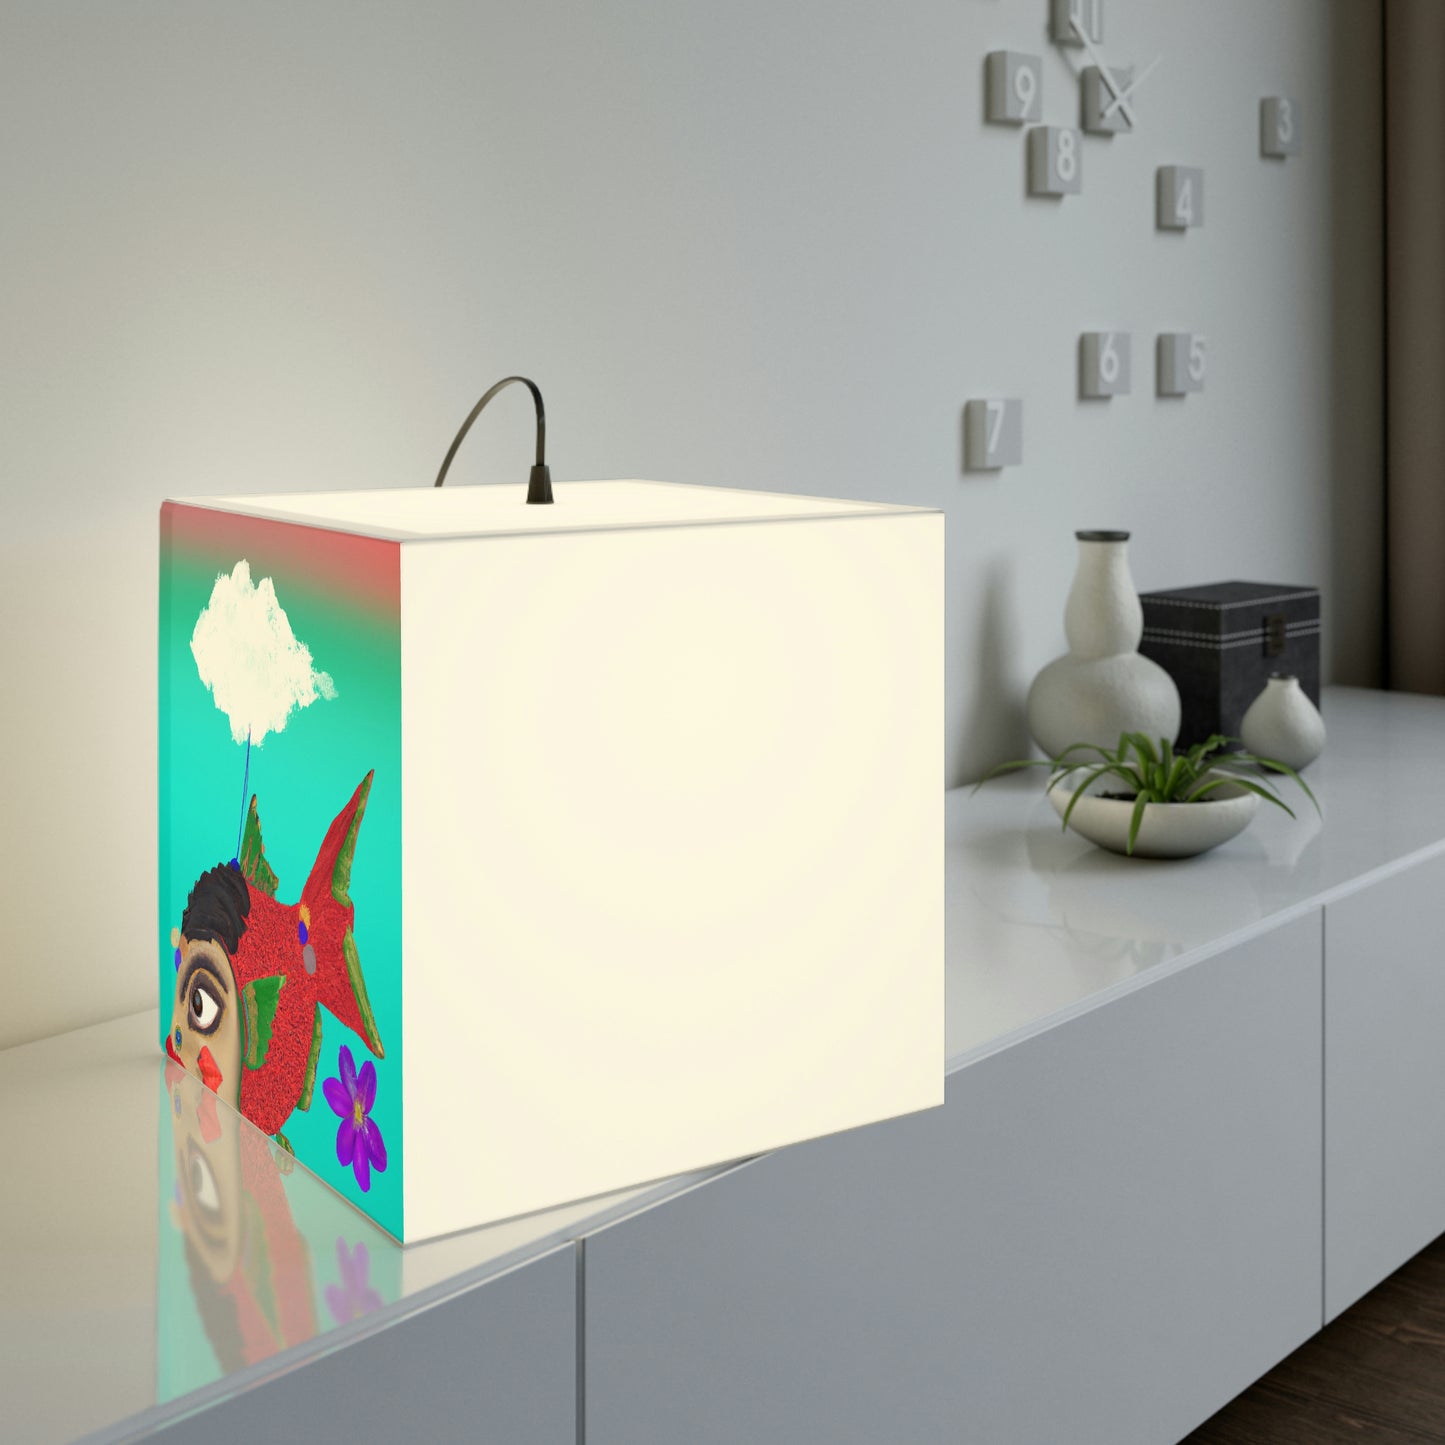 The Mysterious Flying Fish and Its Enigmatic Secret - The Alien Light Cube Lamp